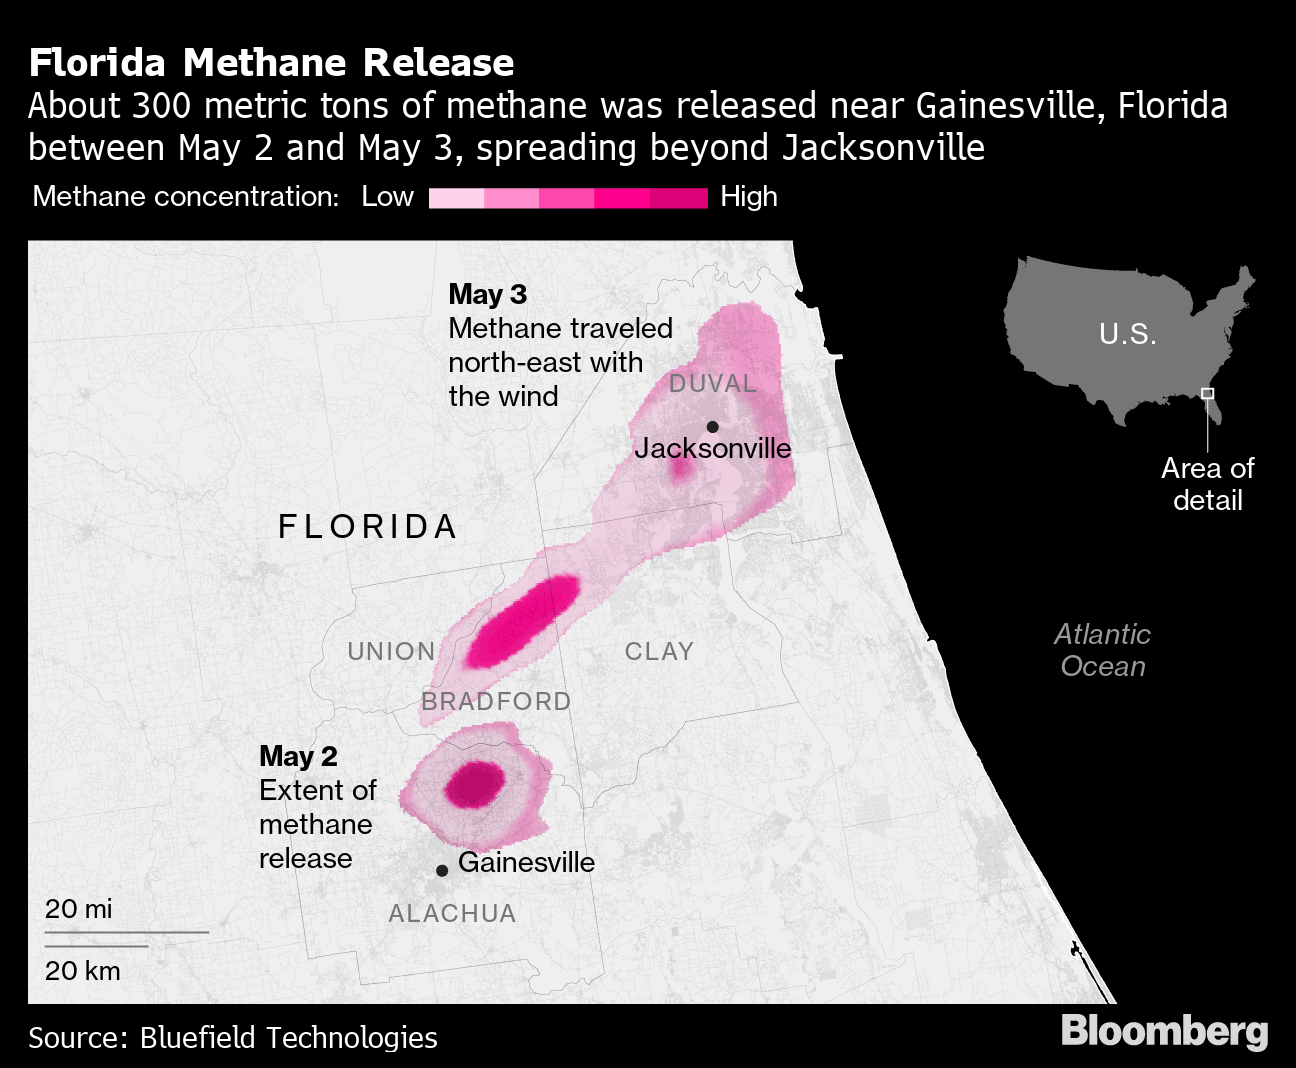 Bloomberg: No One Is Owning Up to Releasing Cloud of Methane in Florida